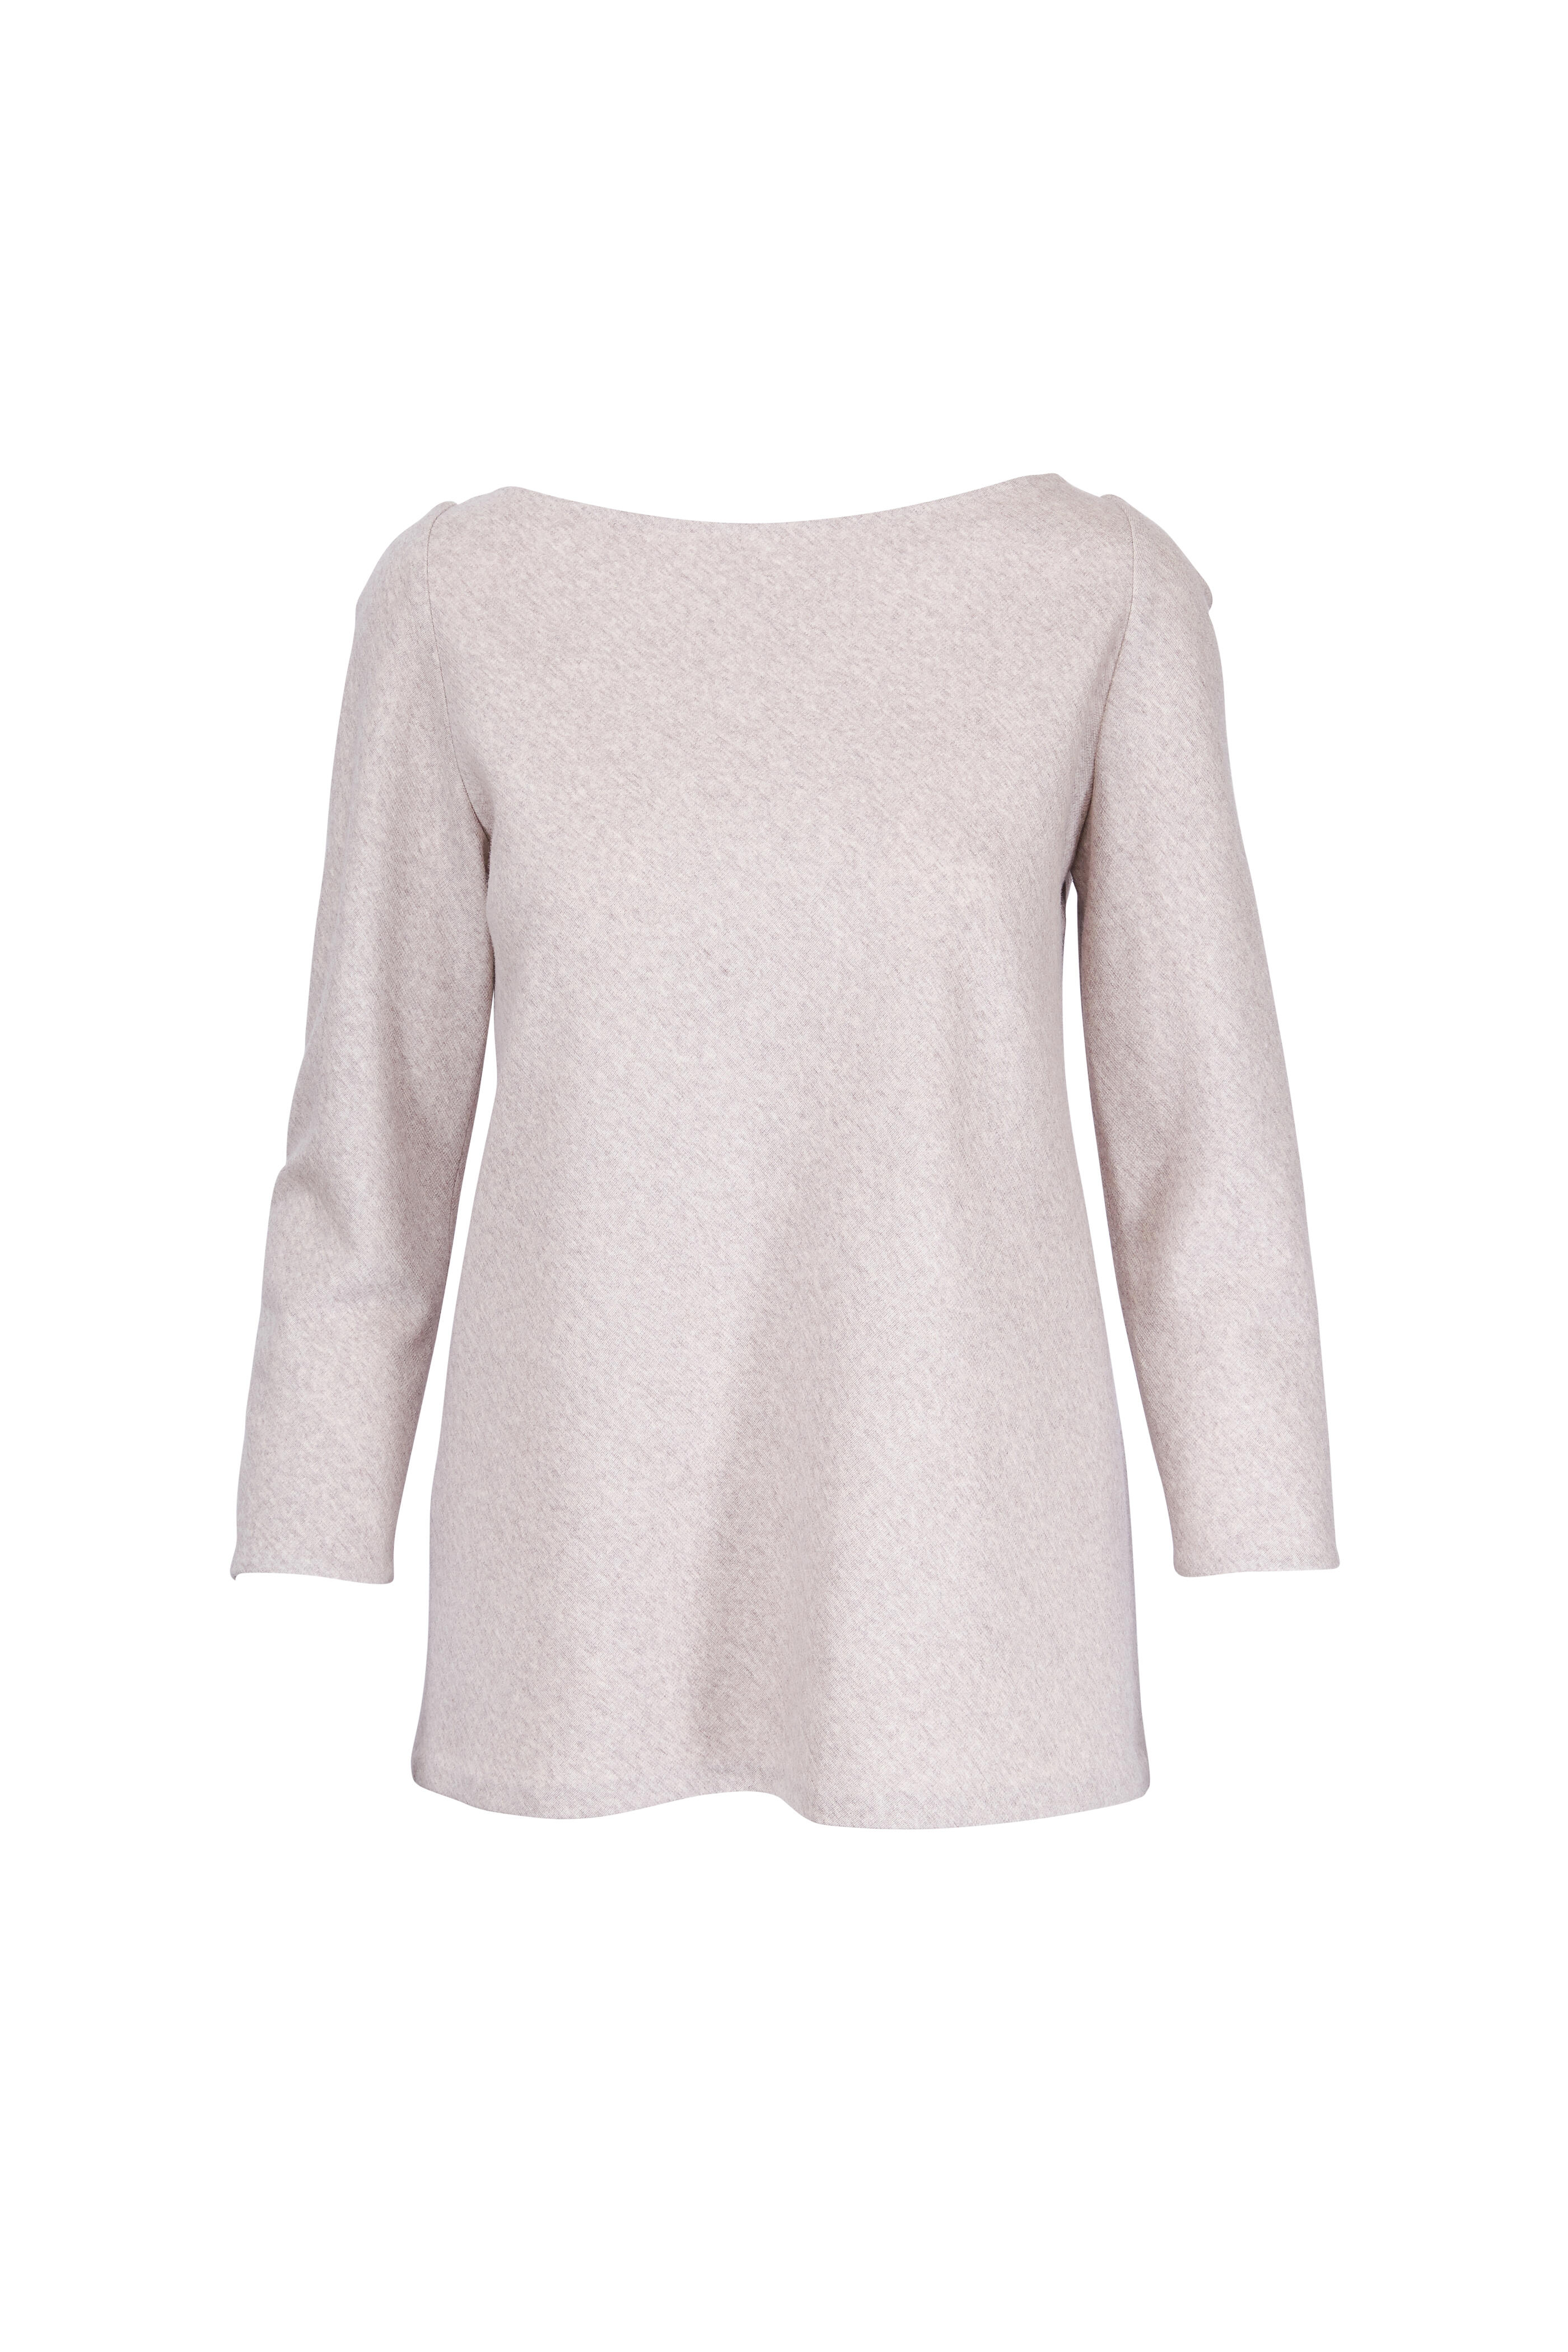 Peter Cohen - Oat Wool Boatneck Tunic | Mitchell Stores